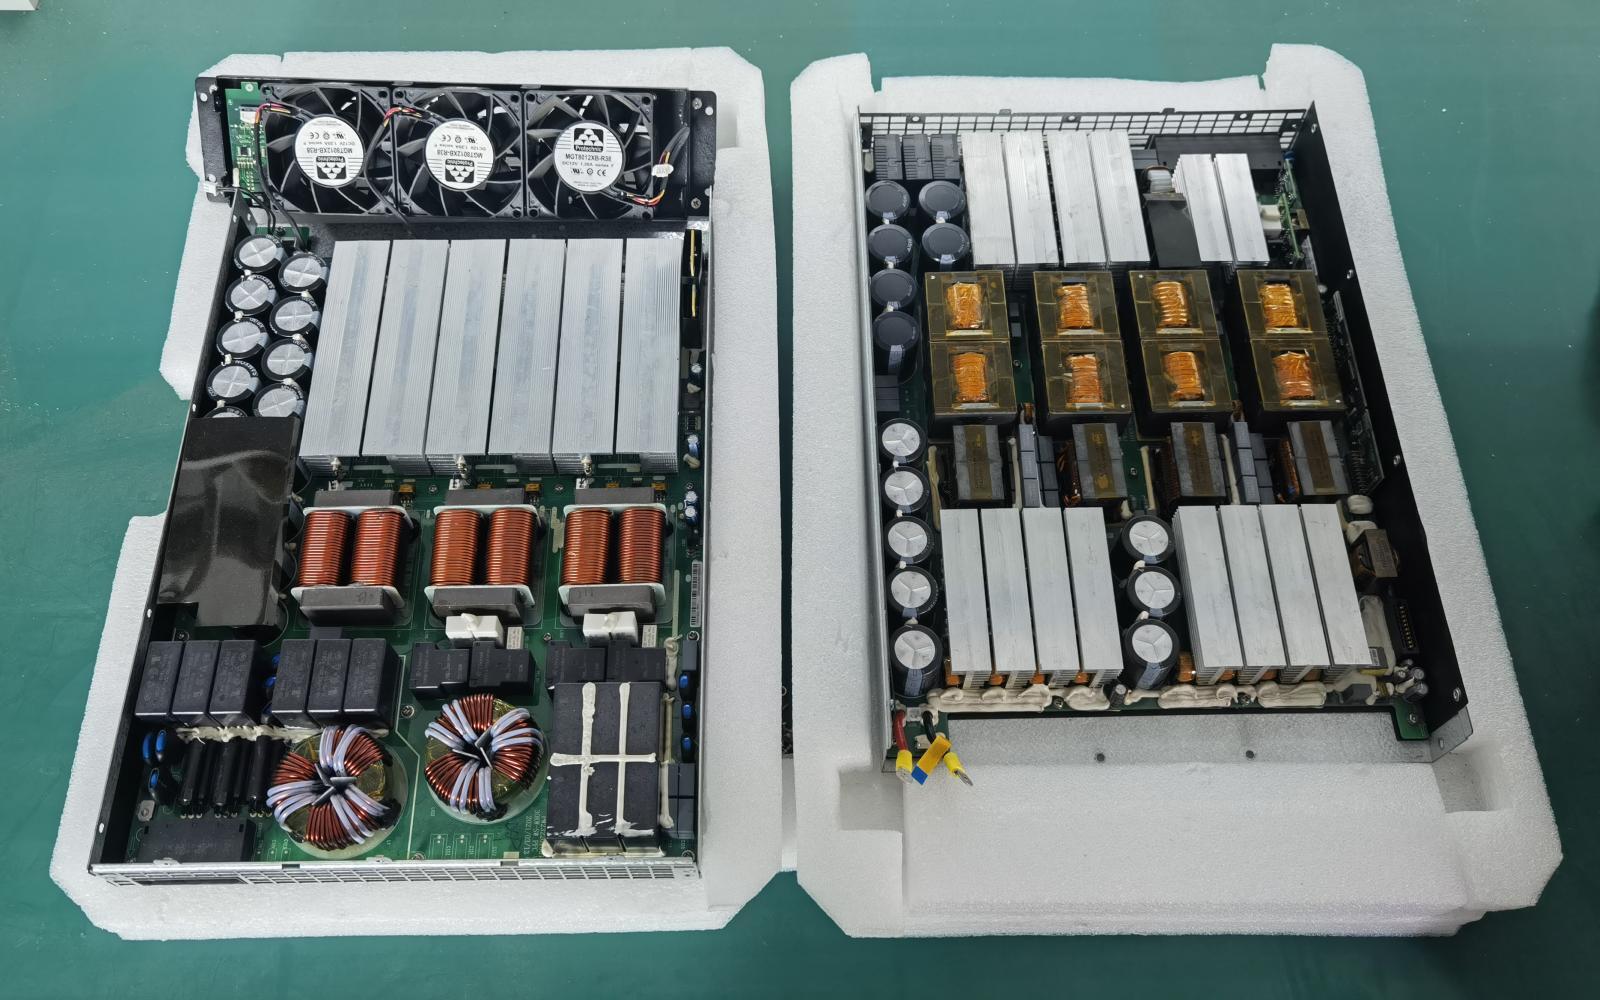 Disadvantages of air cooling power modules